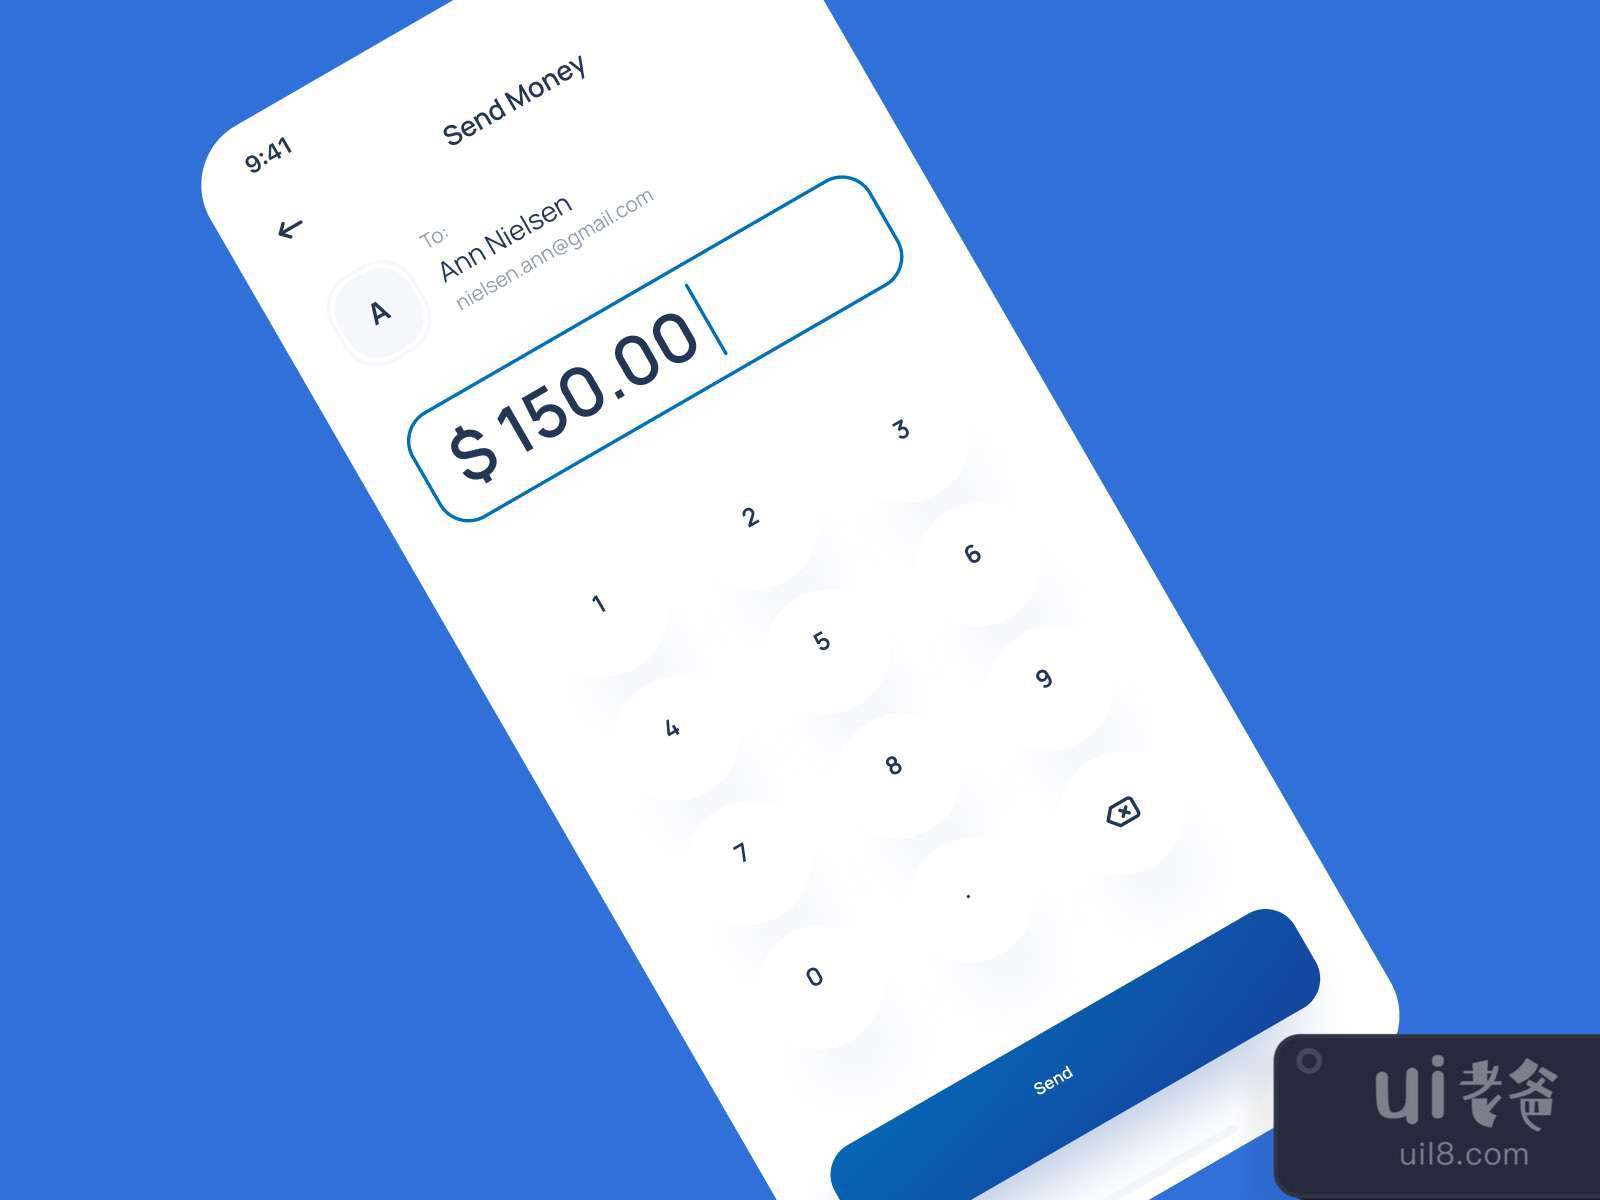 Paypal Redesign for Figma and Adobe XD No 4